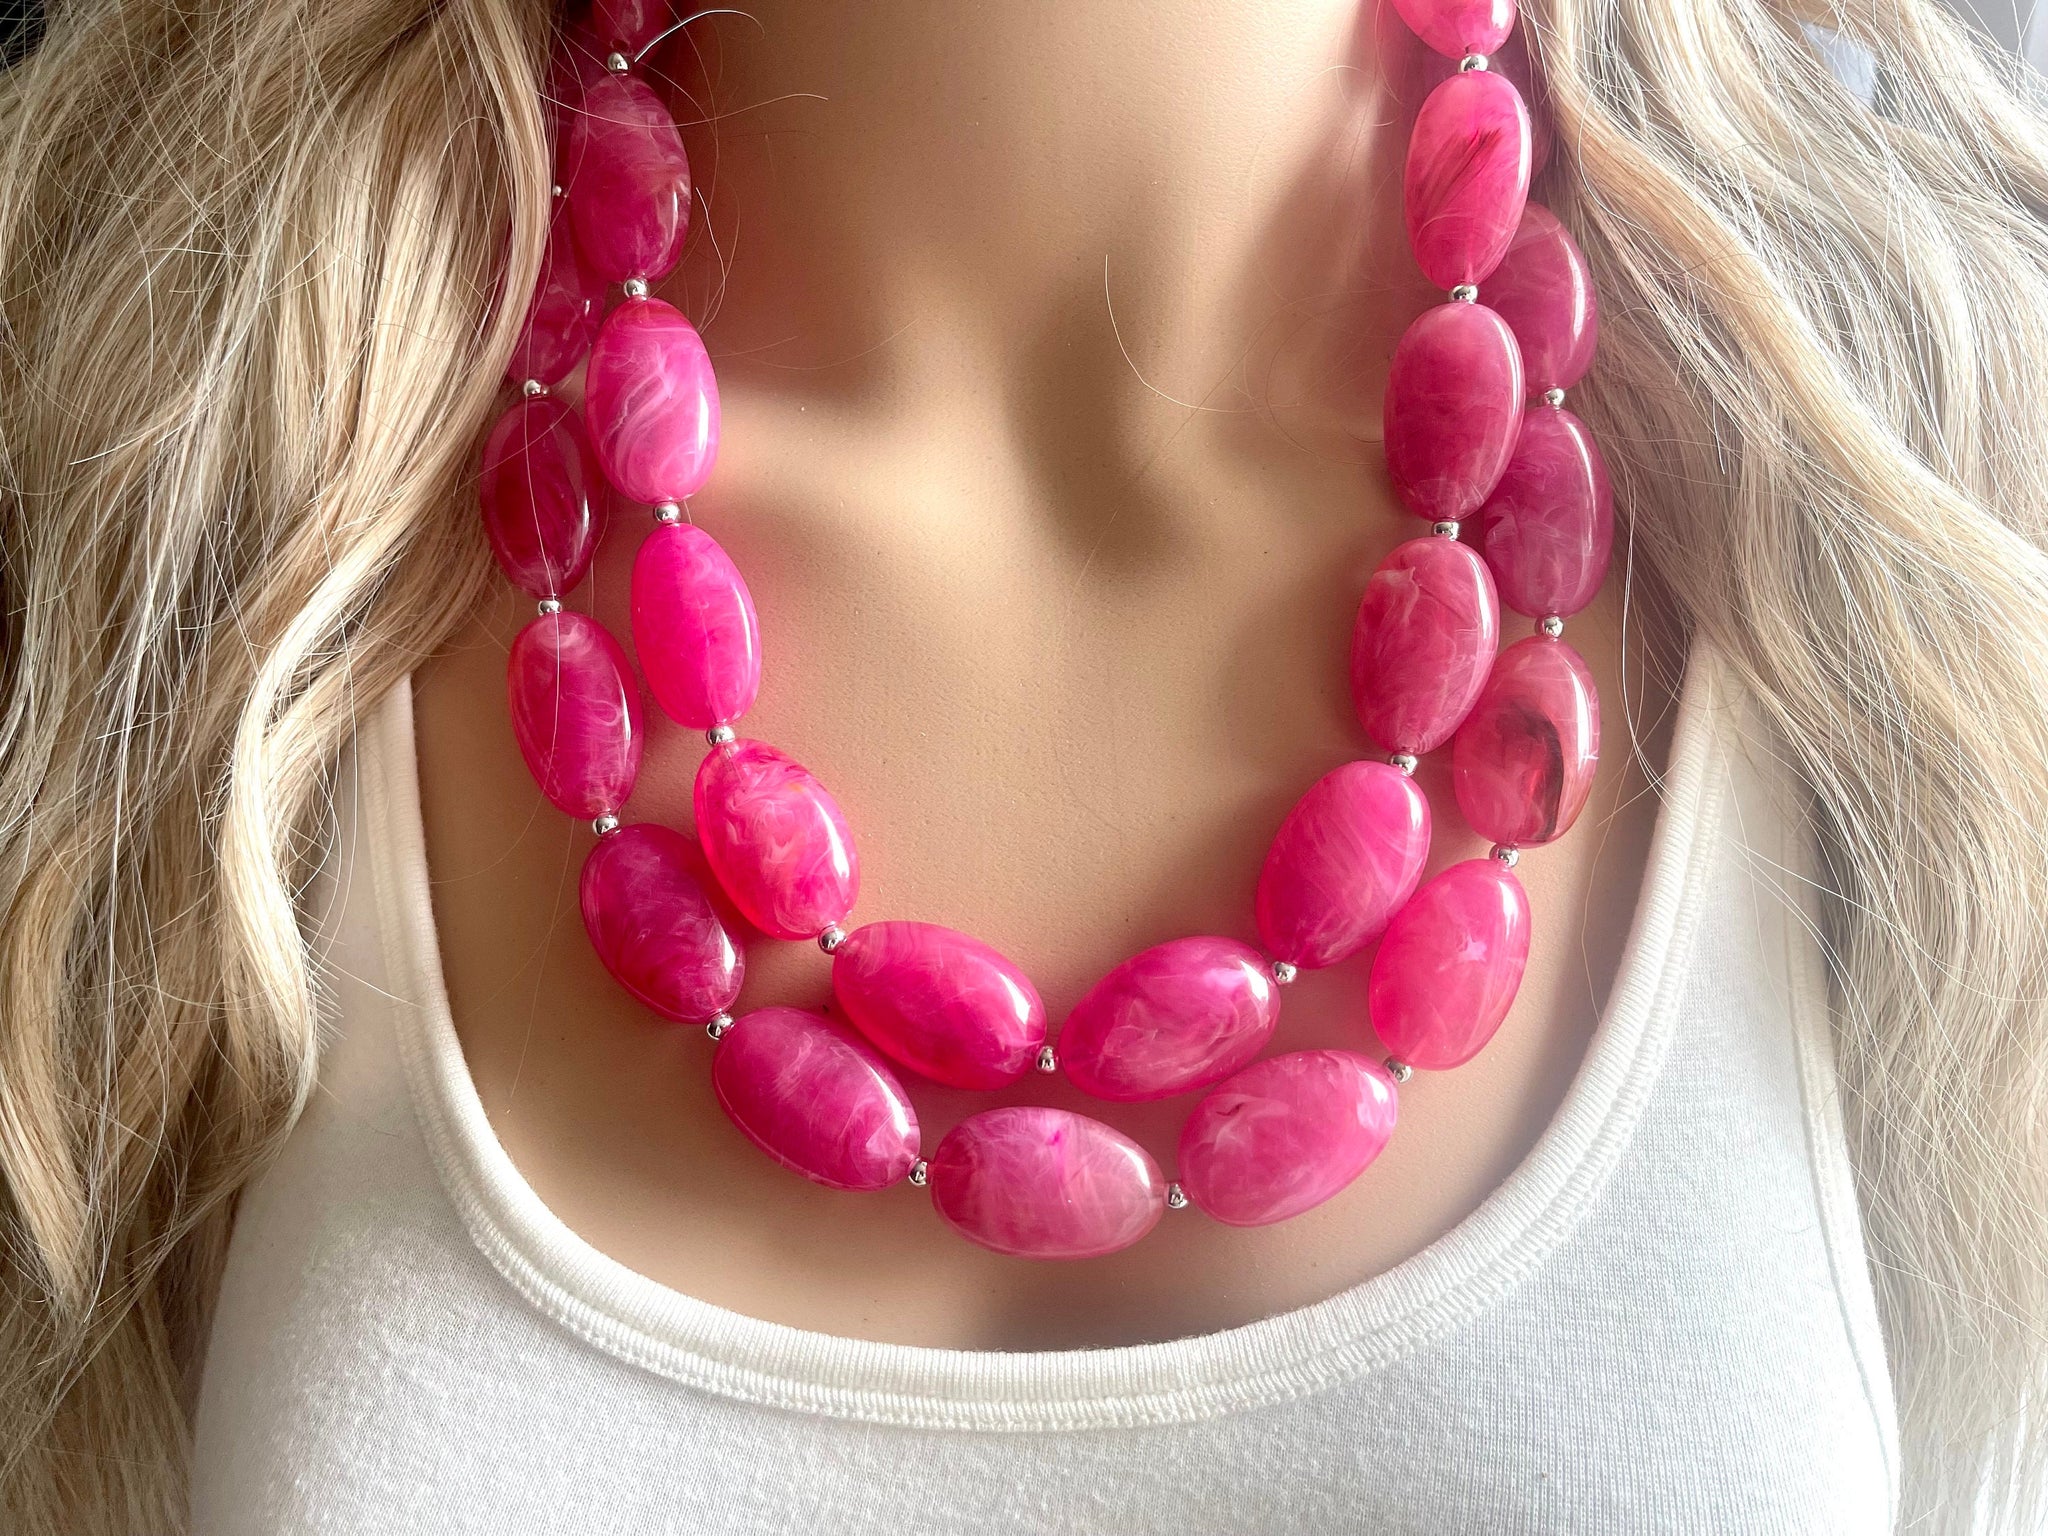 Pink necklace-sets - ZaffreCollections - 4089751